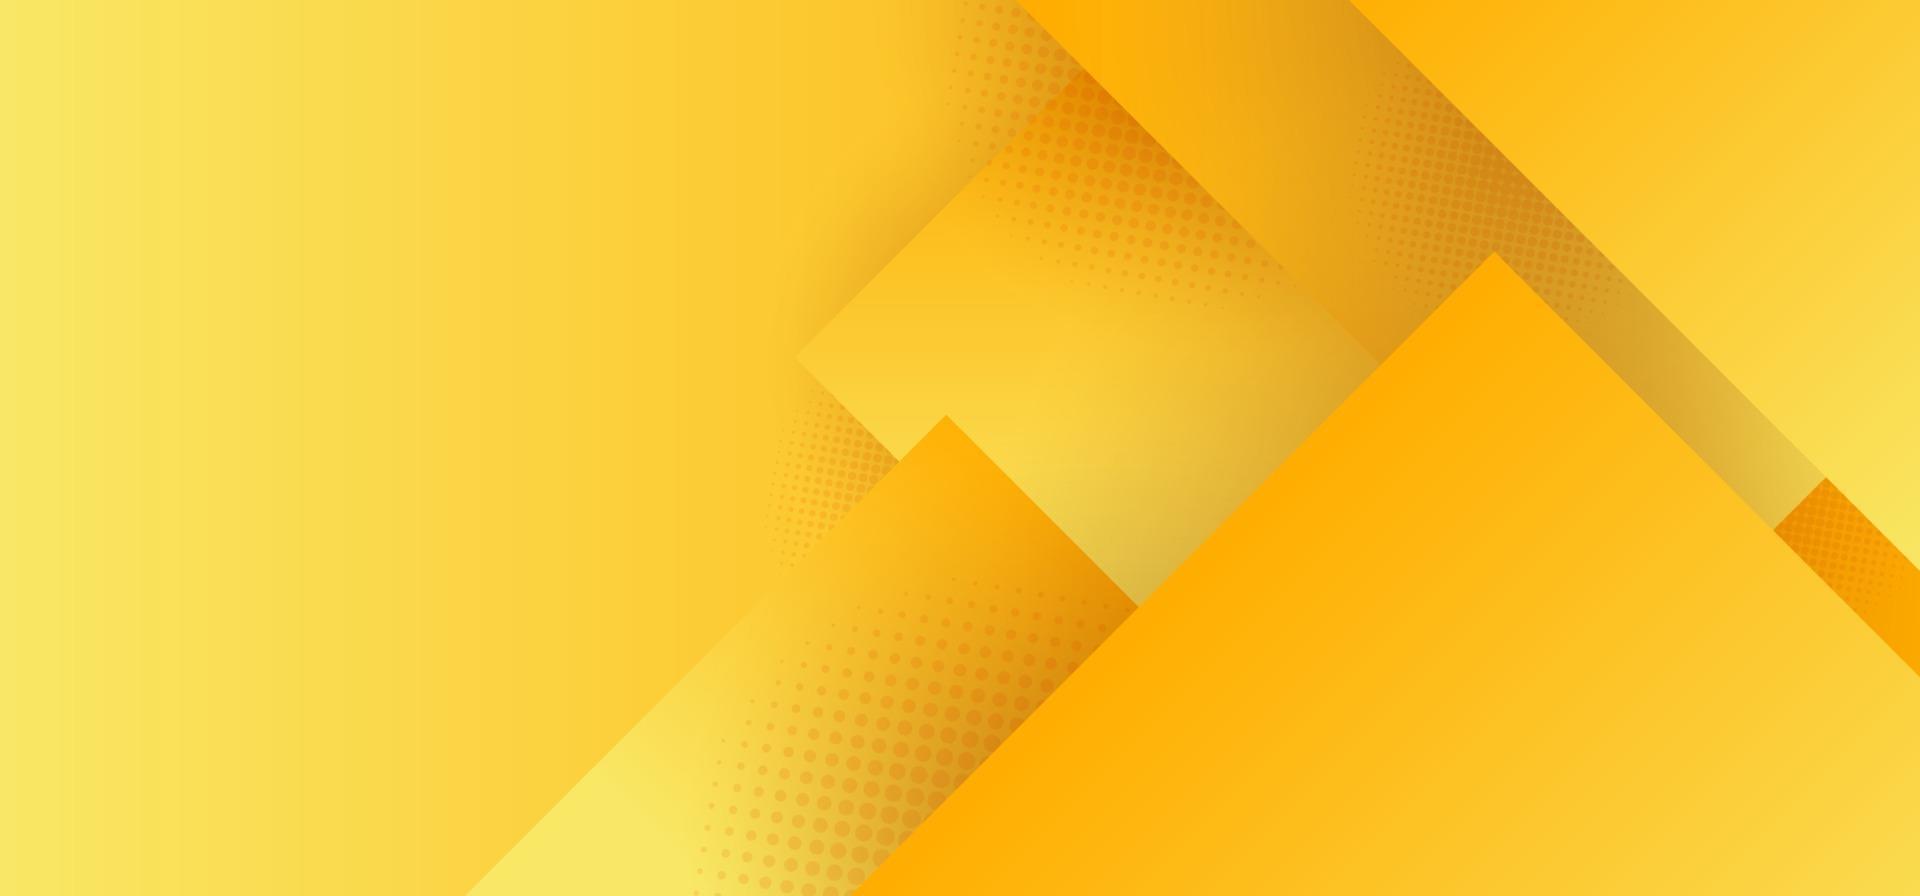 Abstract modern corporate concept yellow geometric square overlapping with halftone background vector